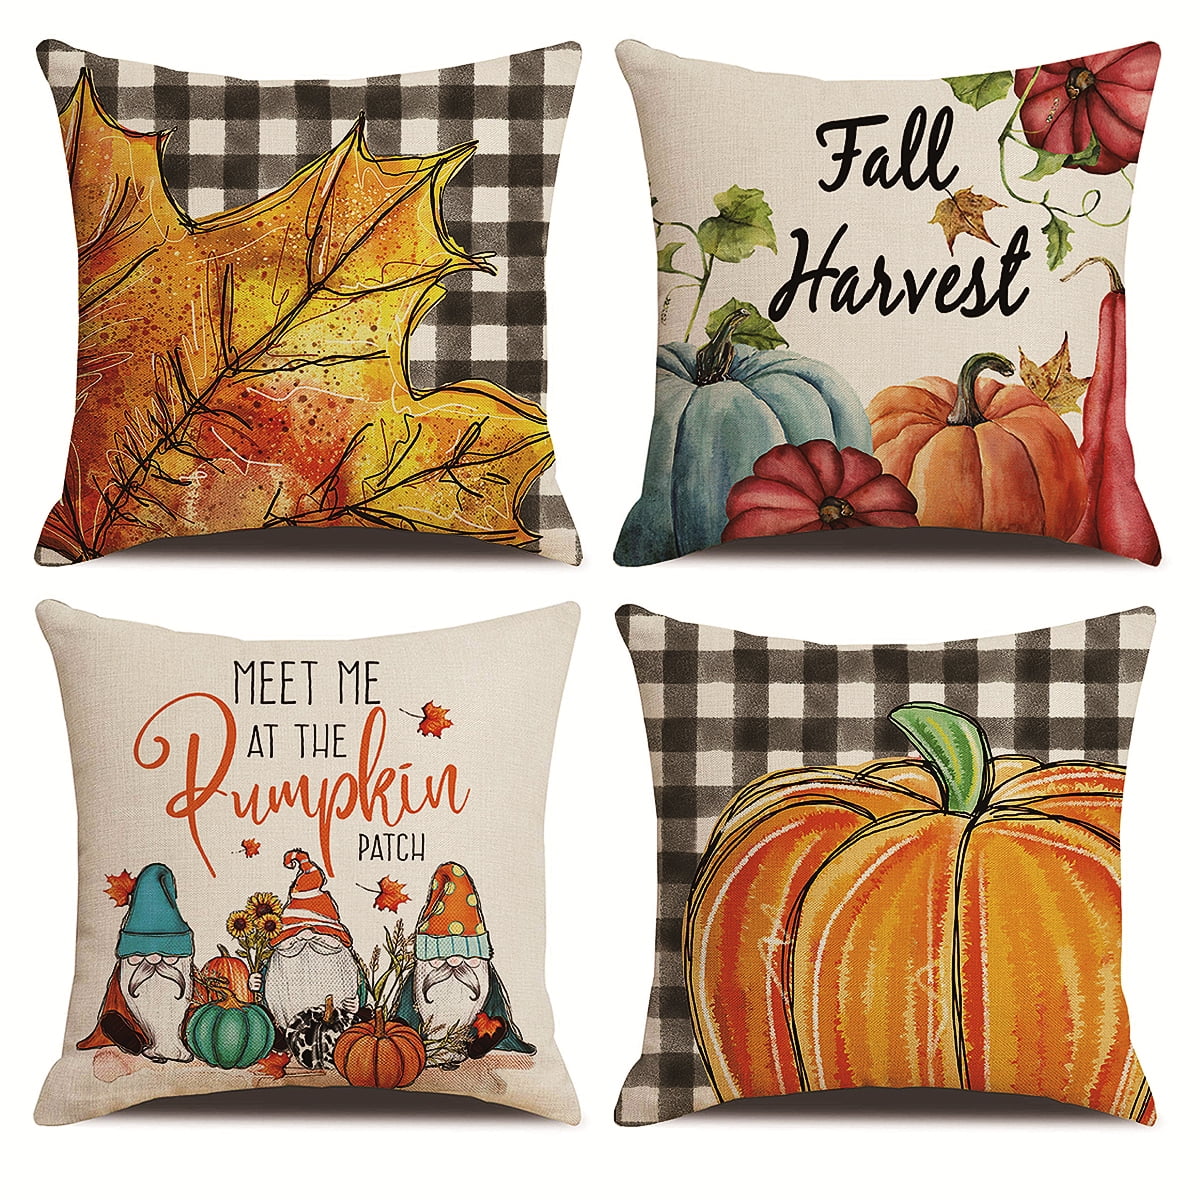 Throw Pillow Covers Autumn Floral Fall Decorative Pillow Covers 18x18 inch  Set of 4 Orange Watercolo…See more Throw Pillow Covers Autumn Floral Fall